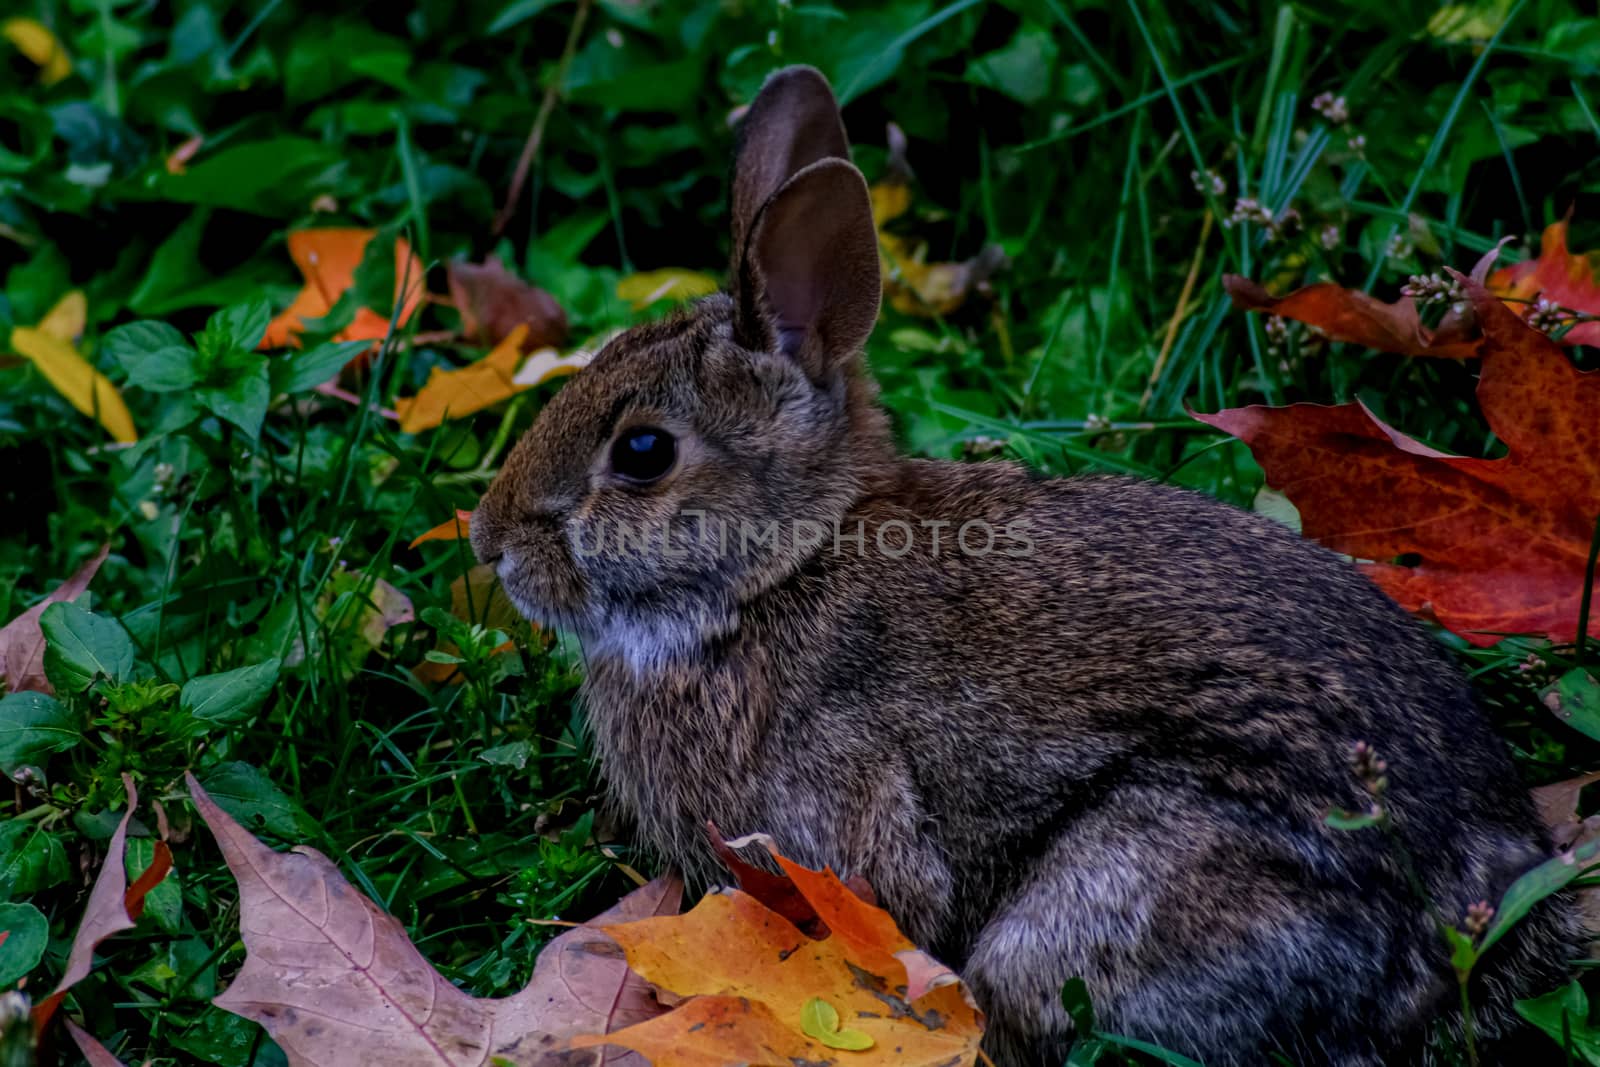 An eastern cottontail rabbit sits in the grass among fallen autumn leaves.